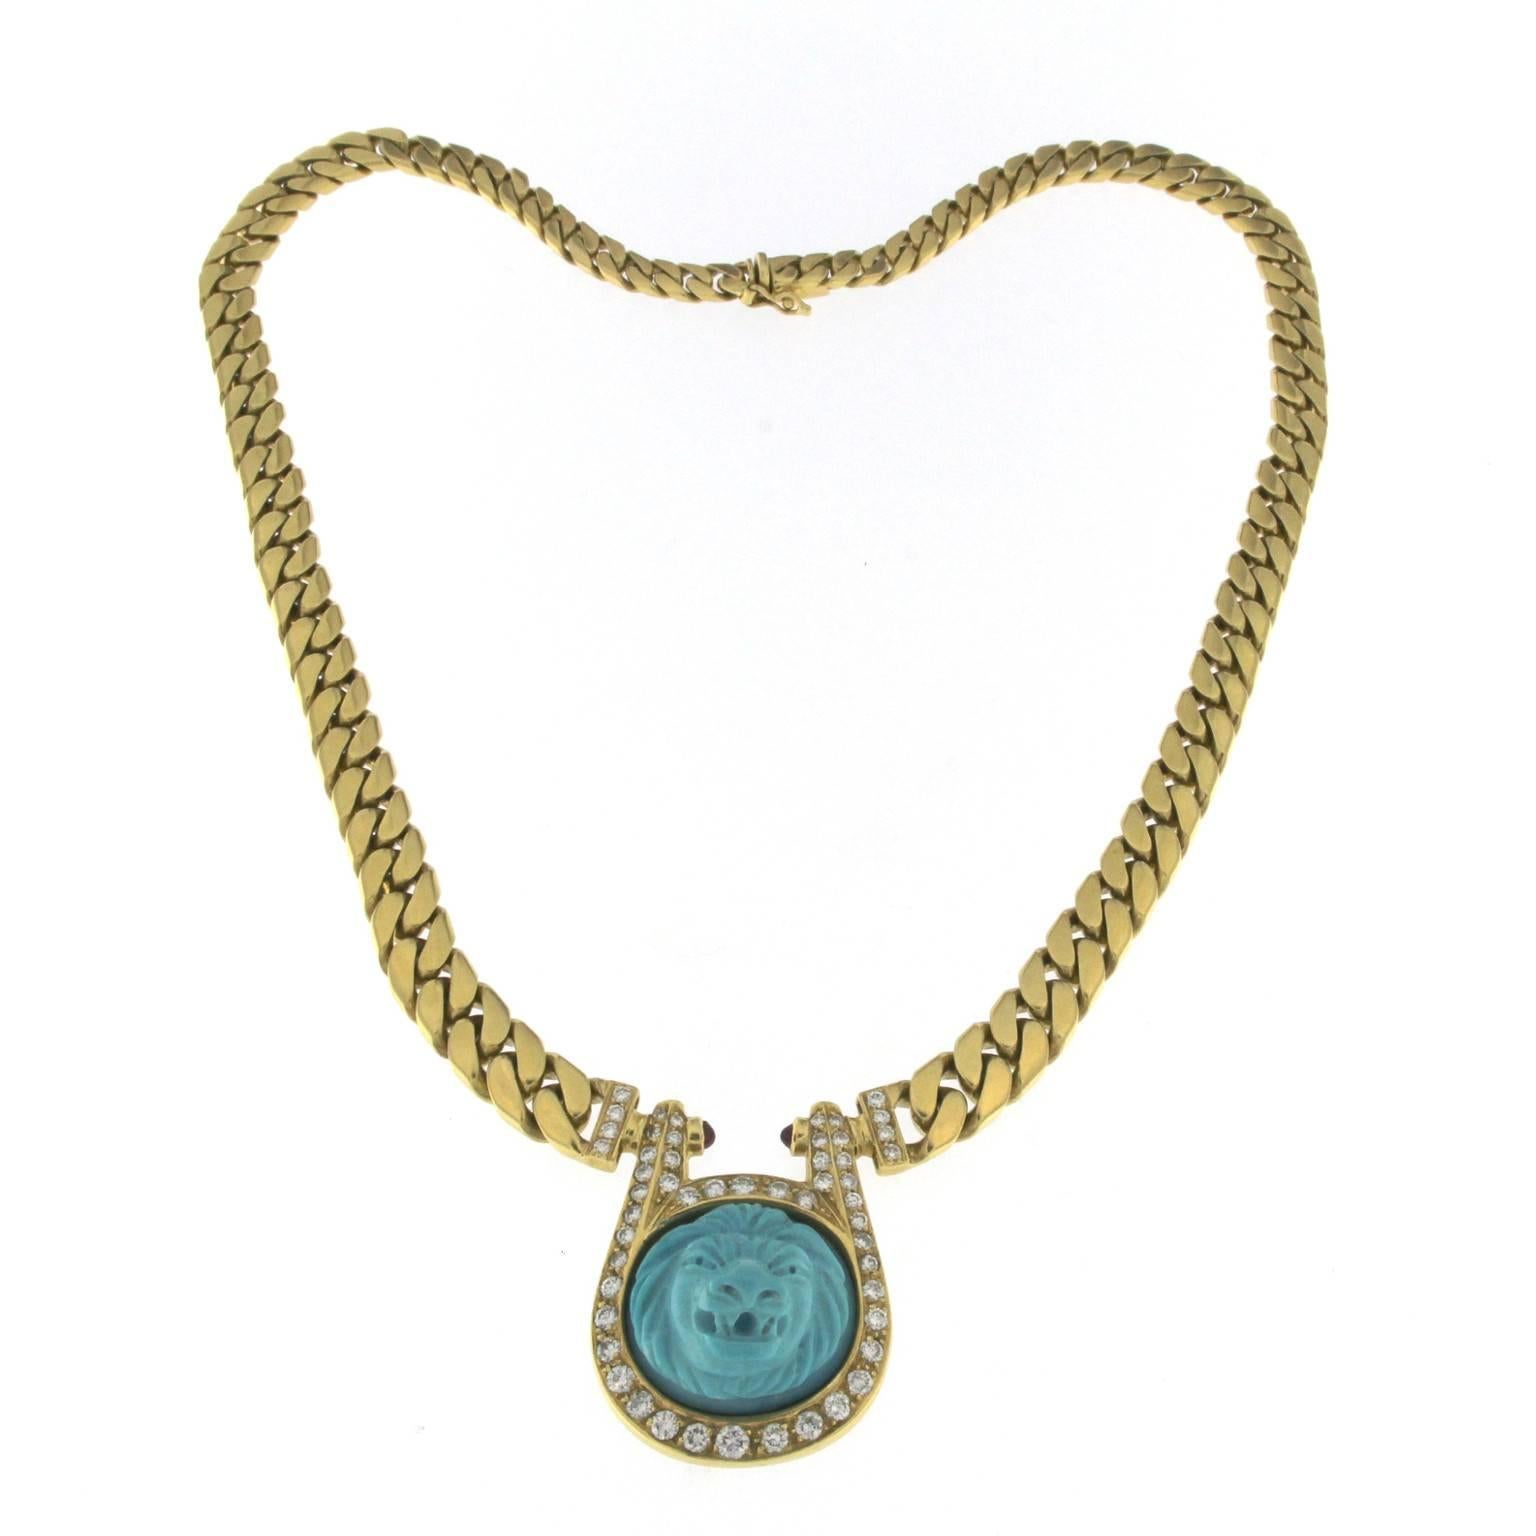 Lion Turquoise Central and Diamonds  in a 18 Karat Gold Necklace and Earrings